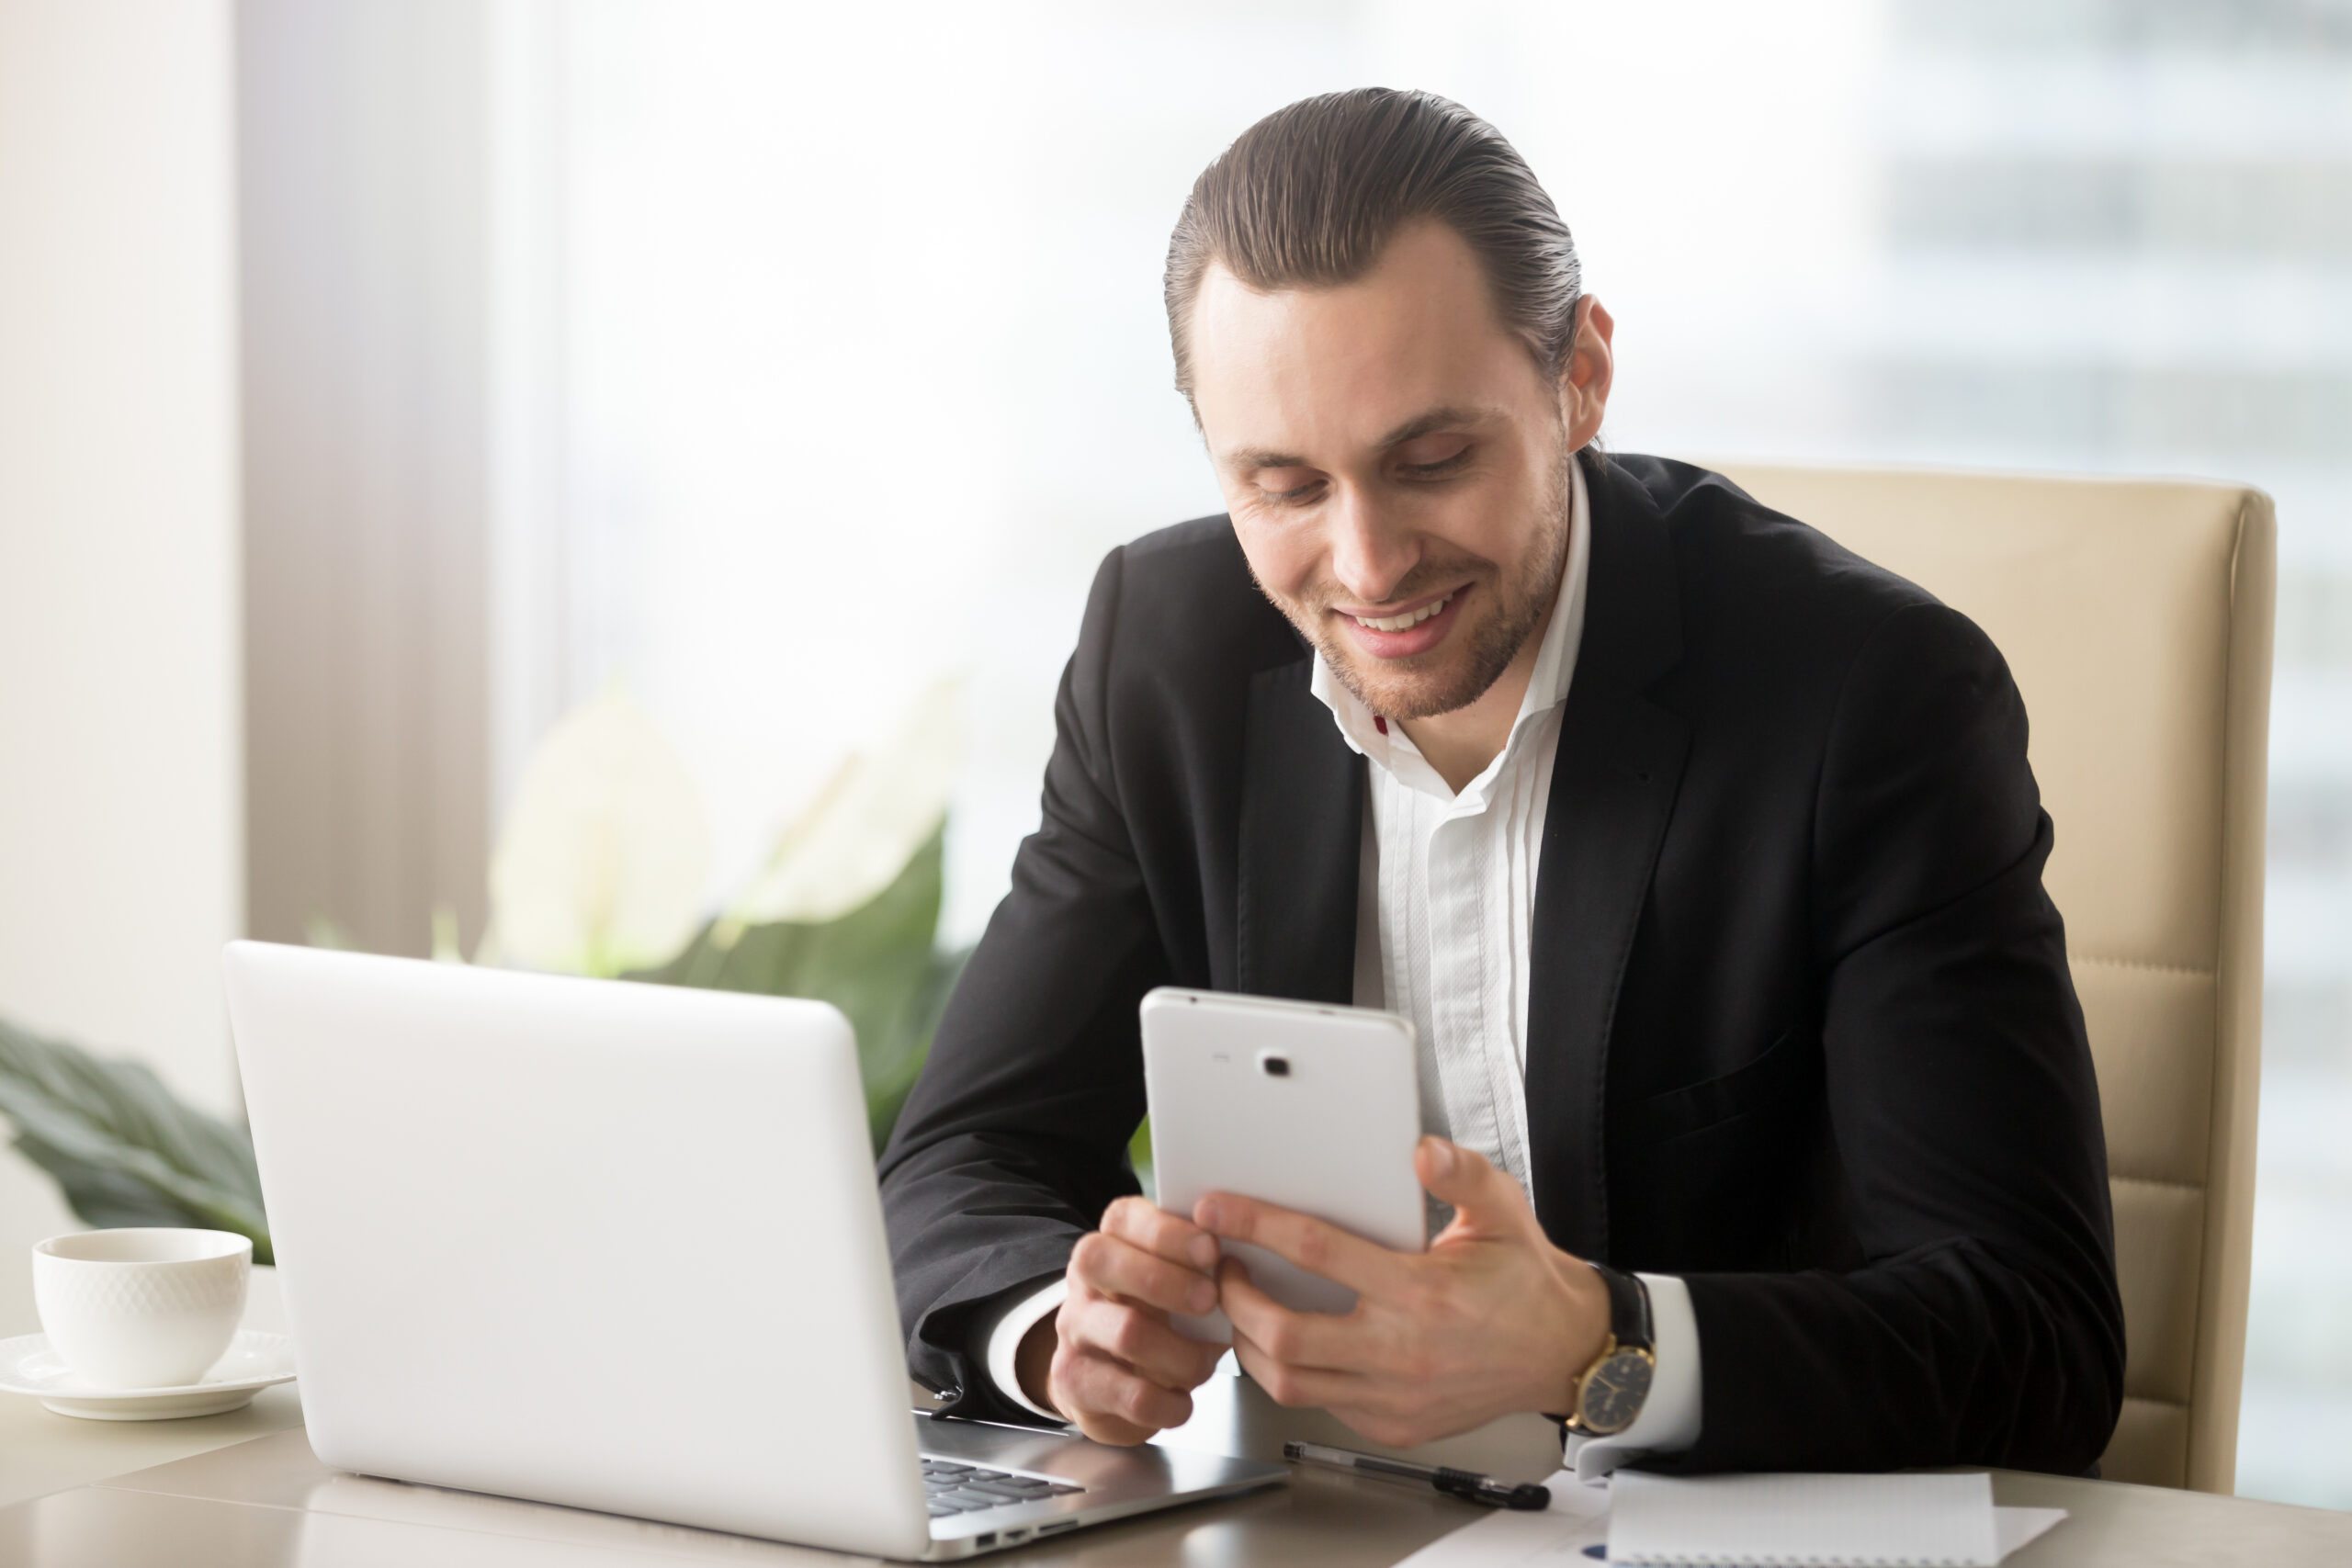 Smart young smiling handsome businessman in modern office in front of laptop looking at electronic tablet. Receiving good news, startup and entrepreneurship, financial success and investing concept.